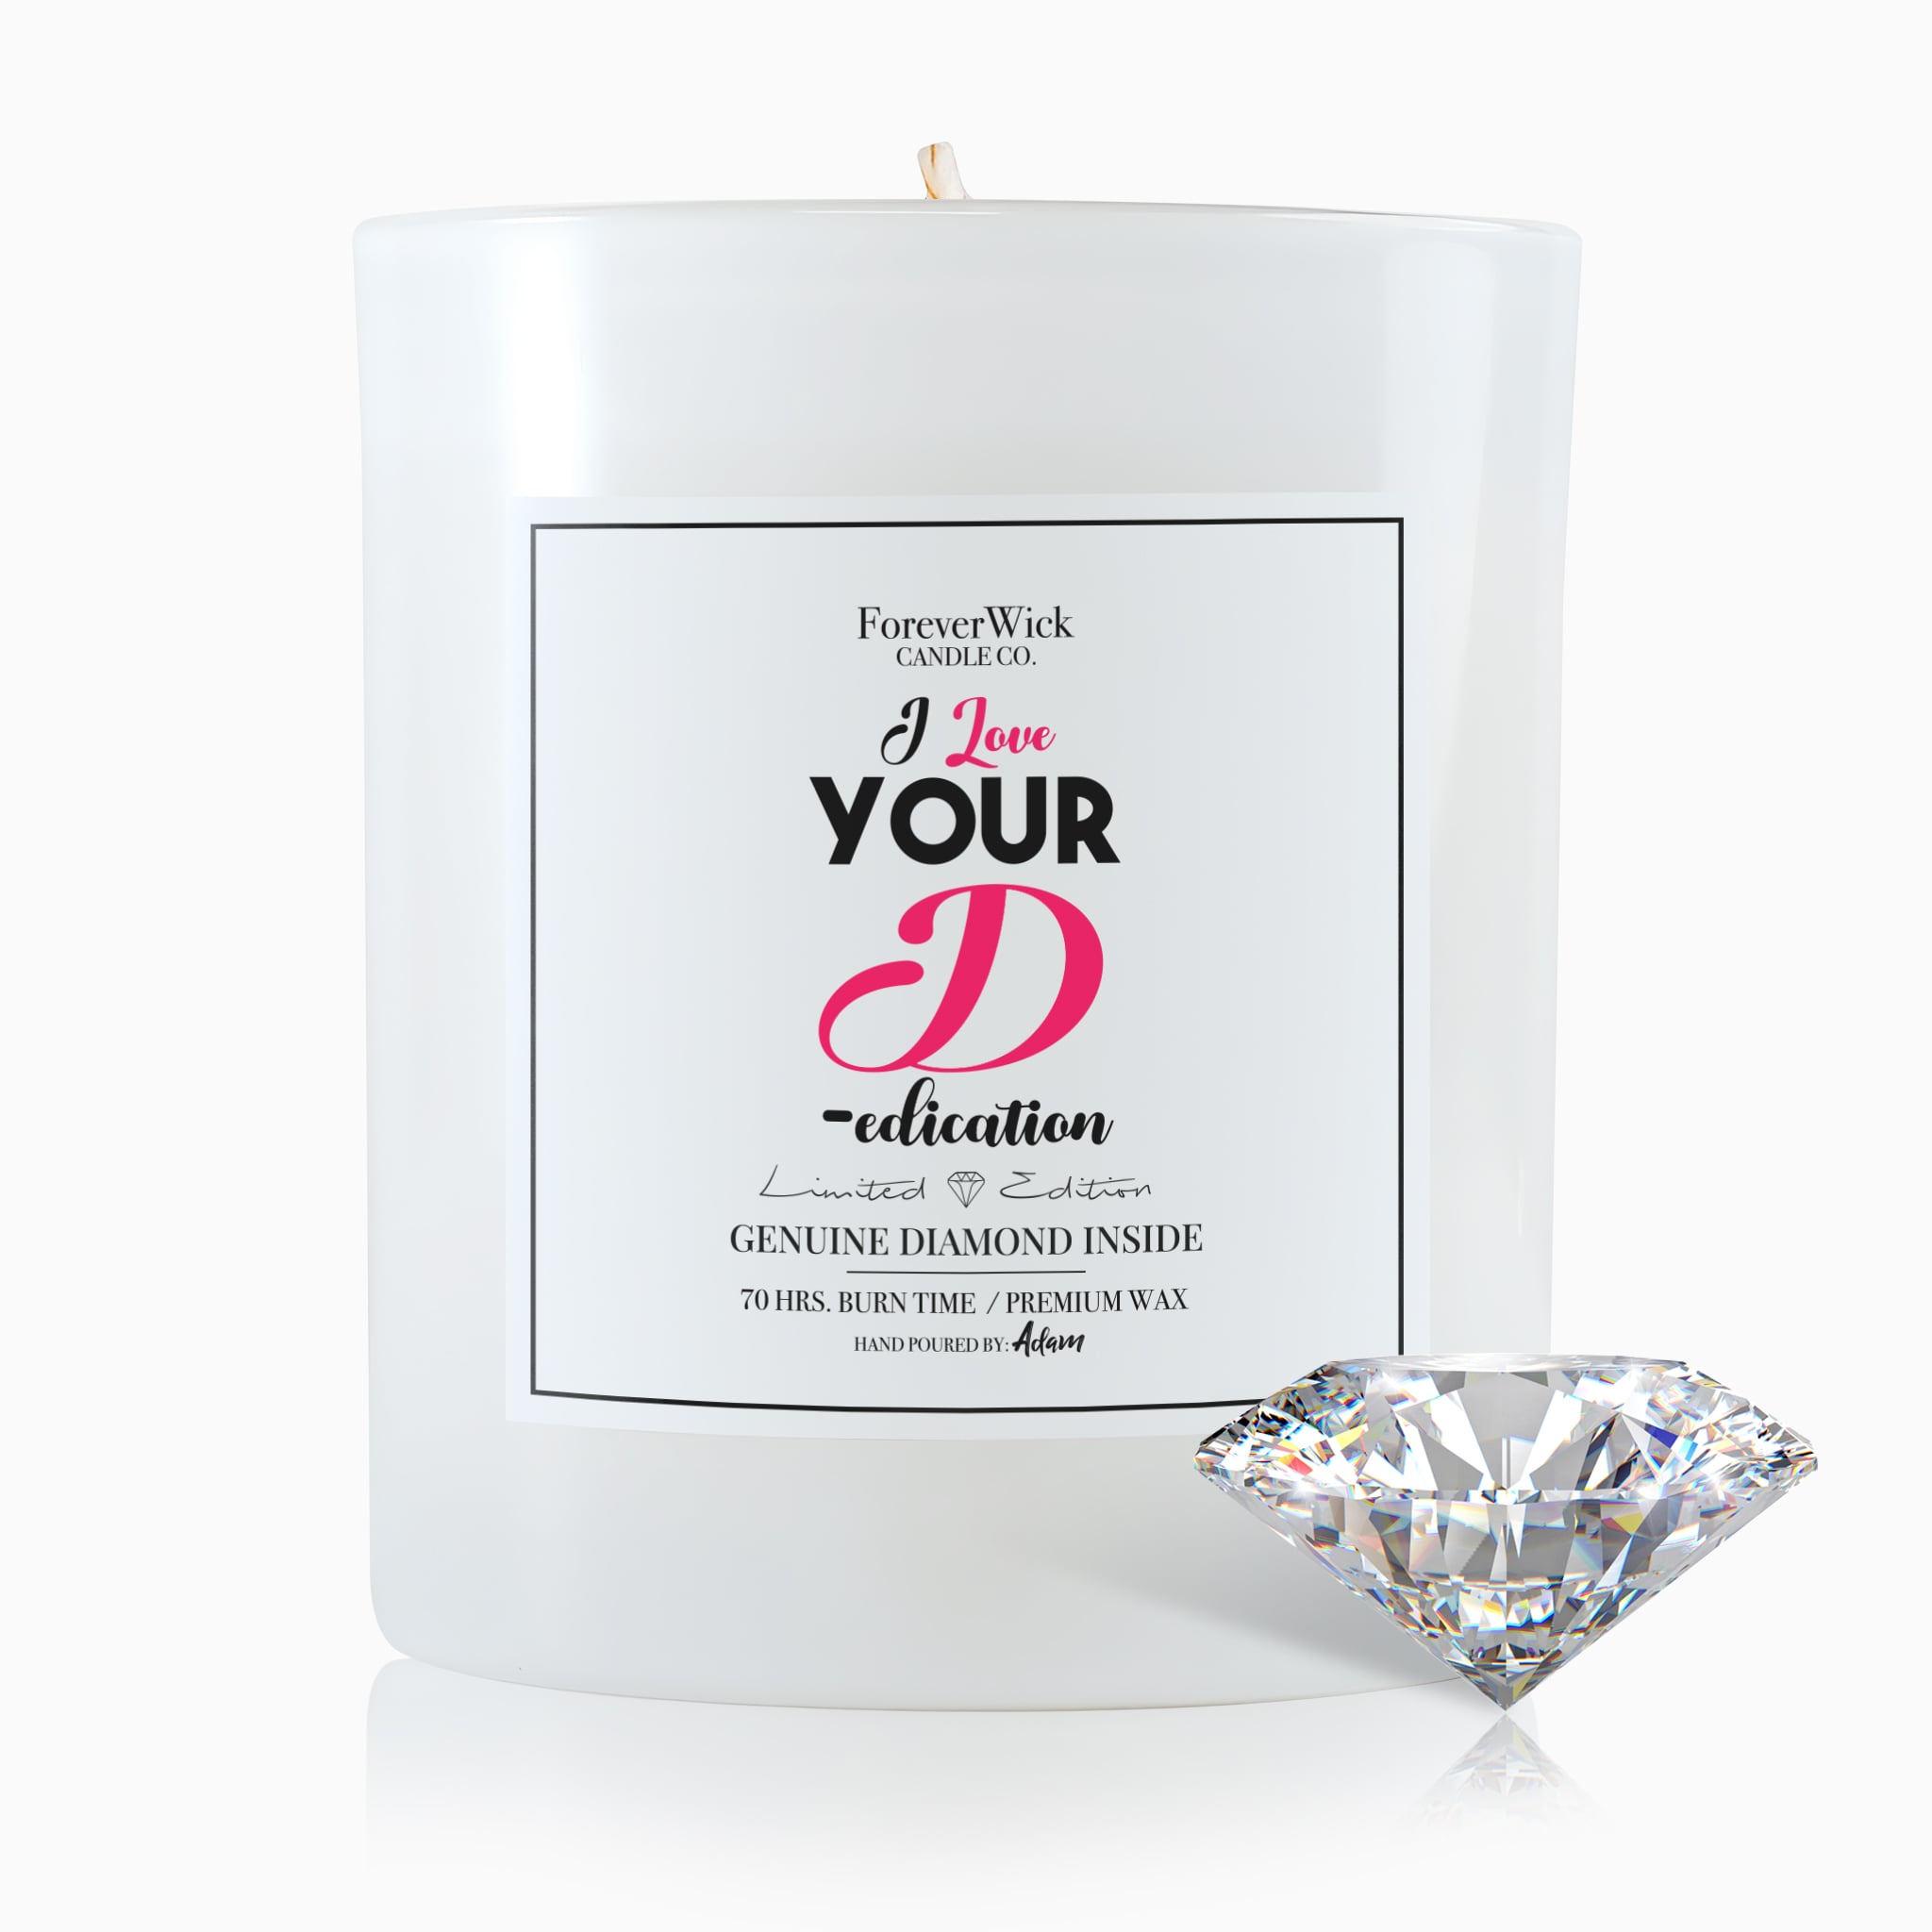 I Love Your D edication Diamond Candle